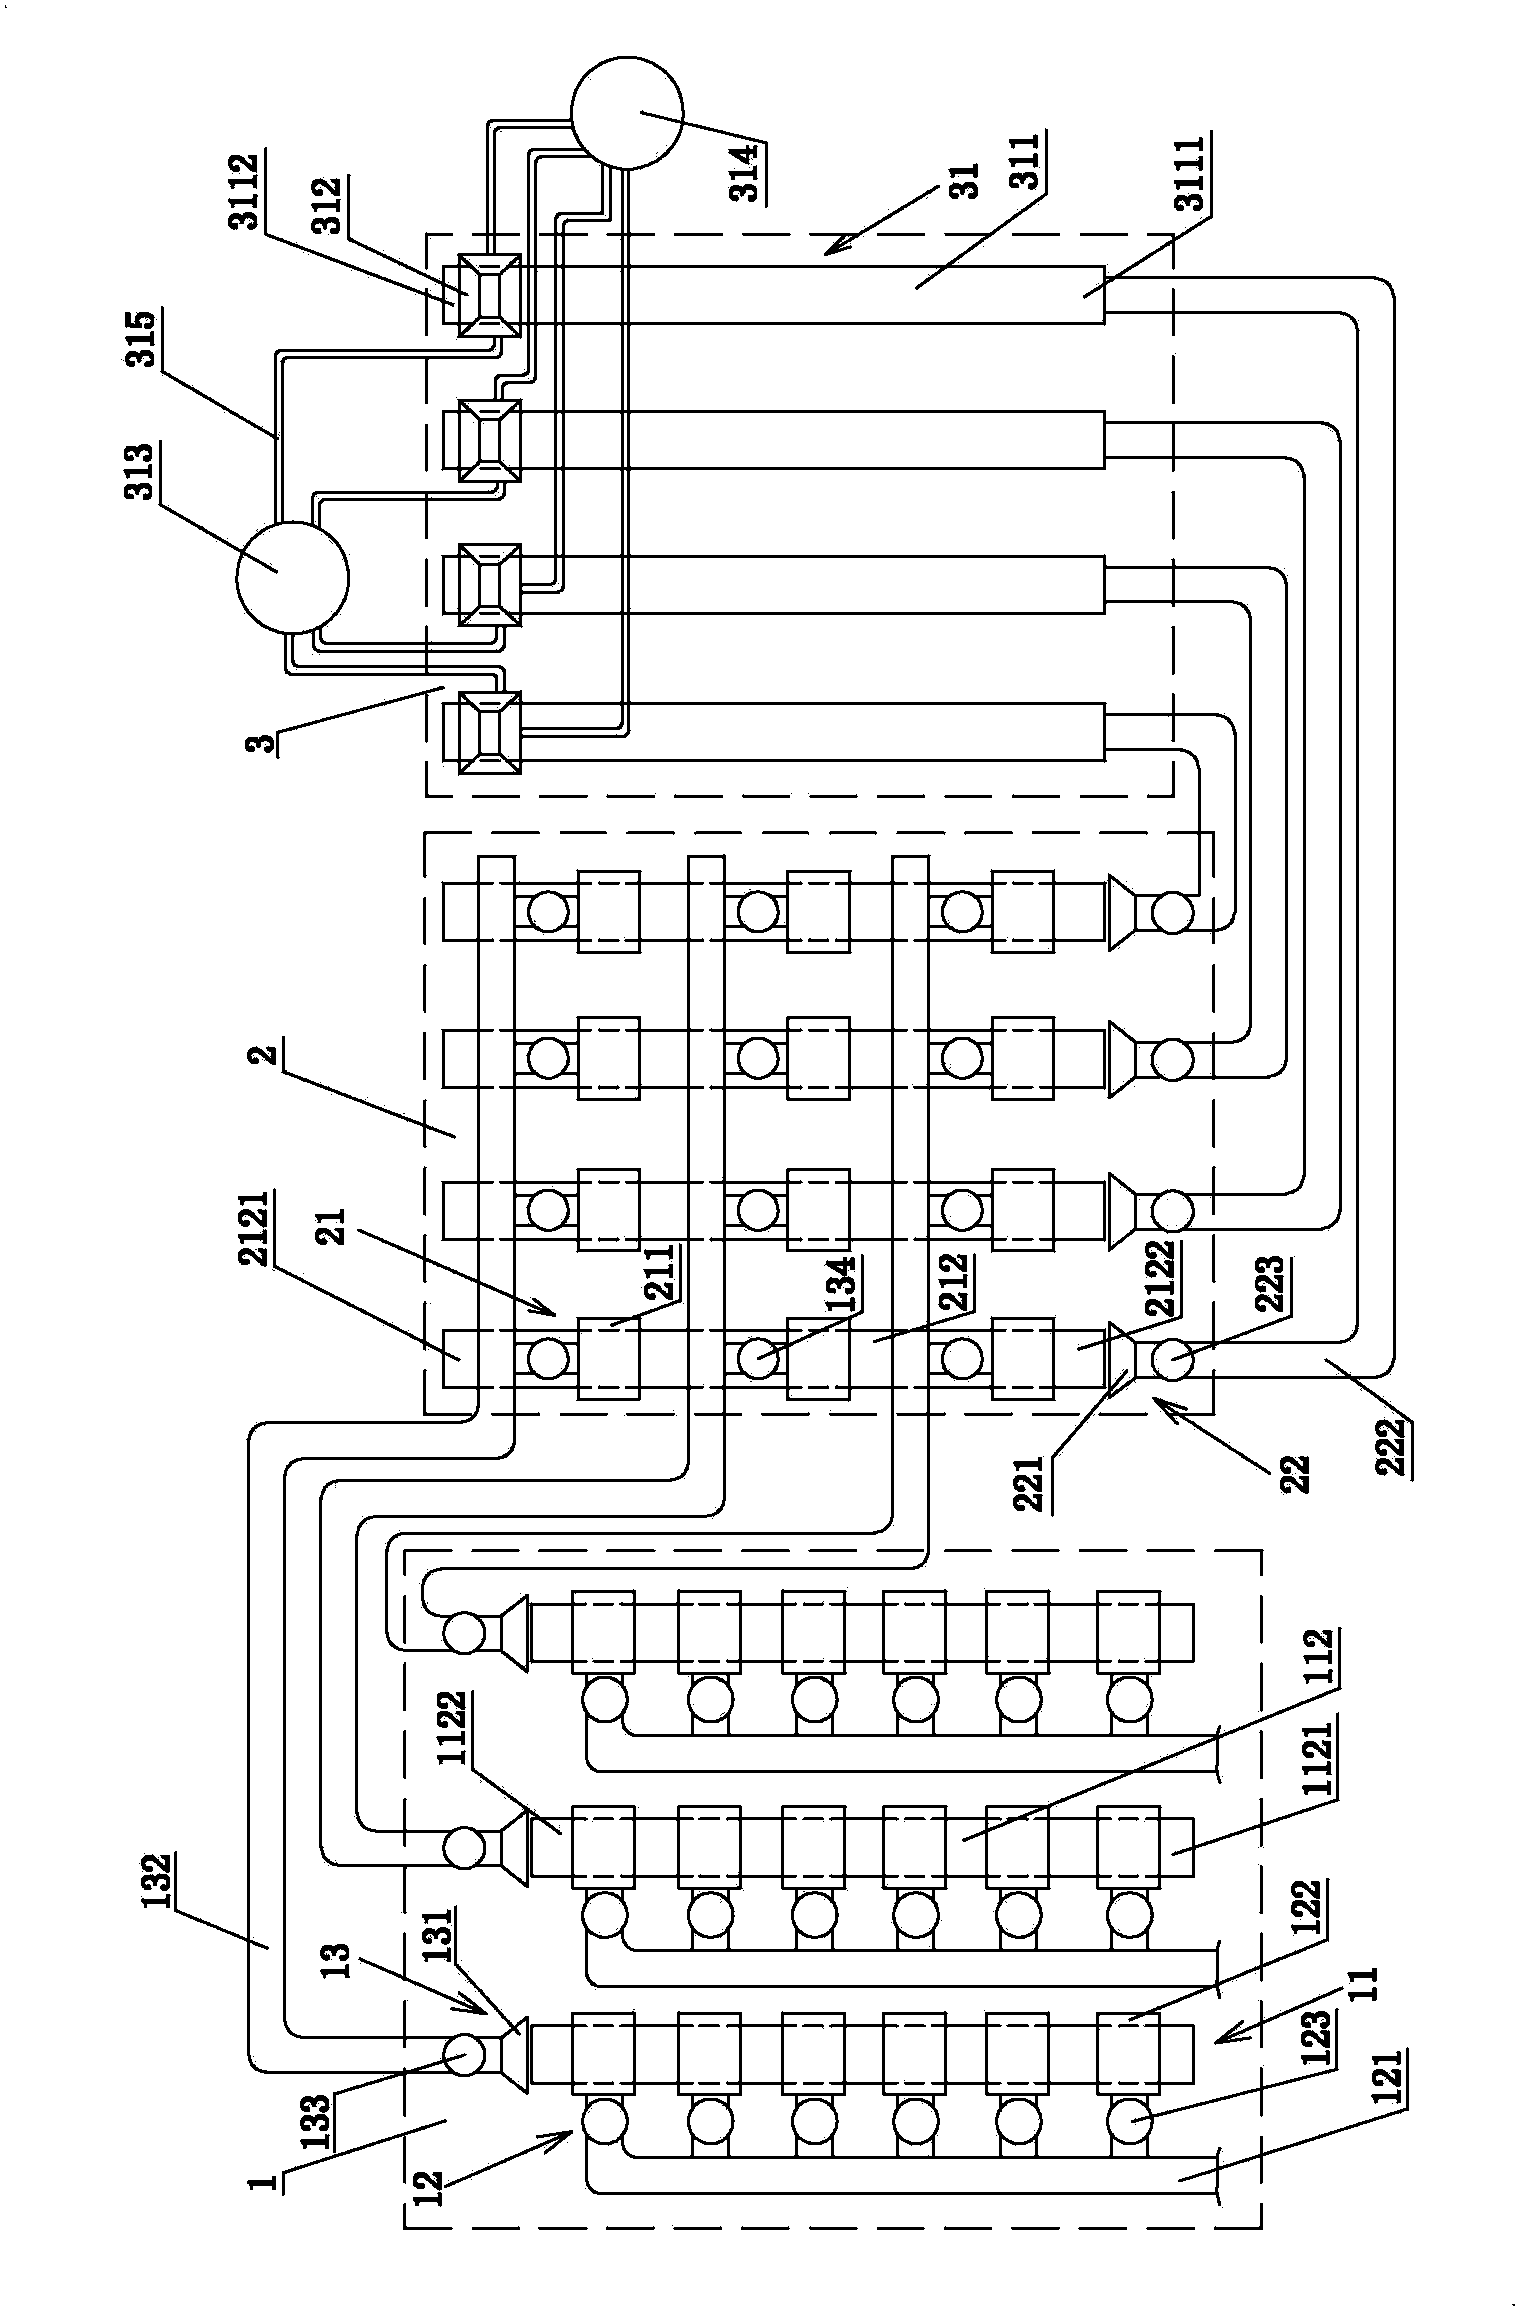 Multistage dispensing equipment applied to production of regenerative polypropylene